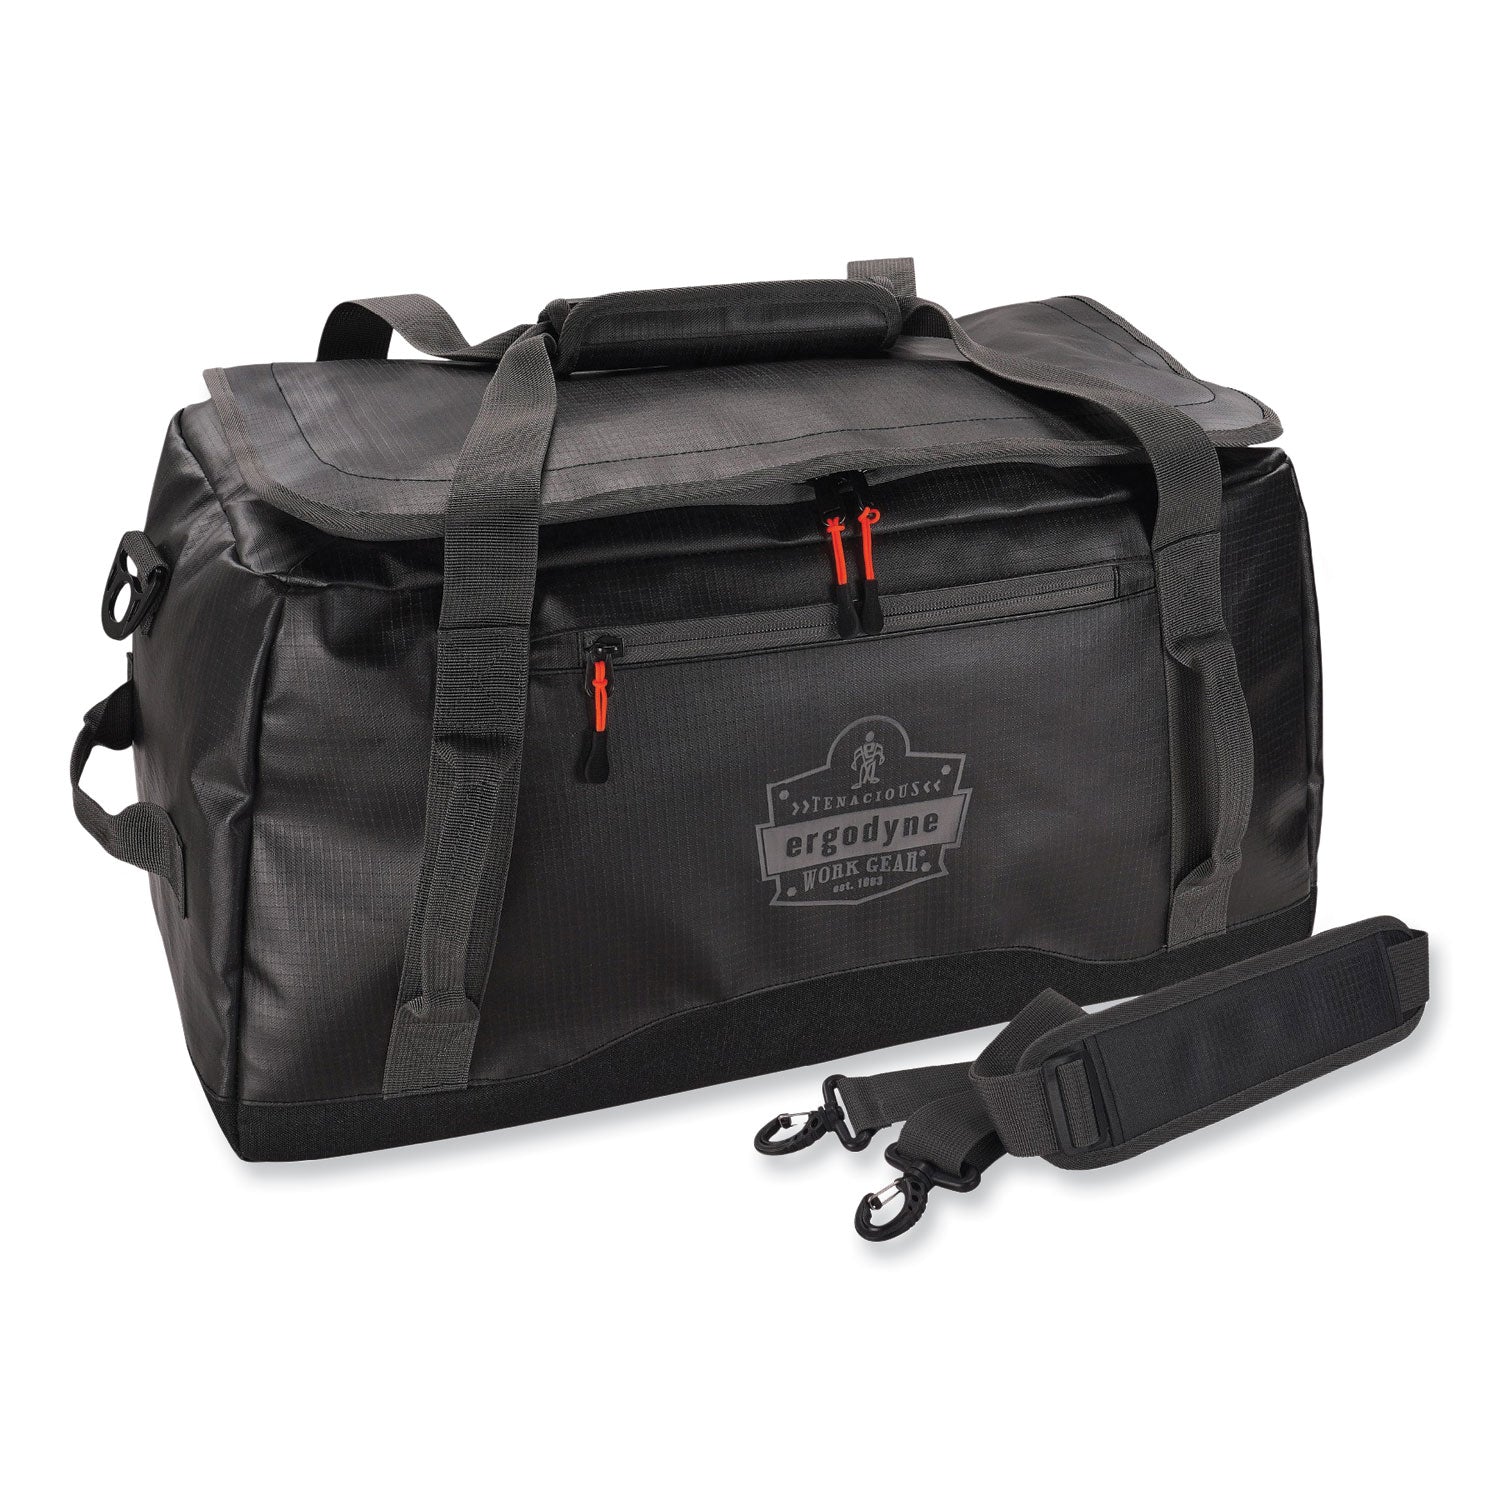 arsenal-5031-water-resistant-duffel-bag-small-122-x-232-x-126-black-ships-in-1-3-business-days_ego13035 - 1